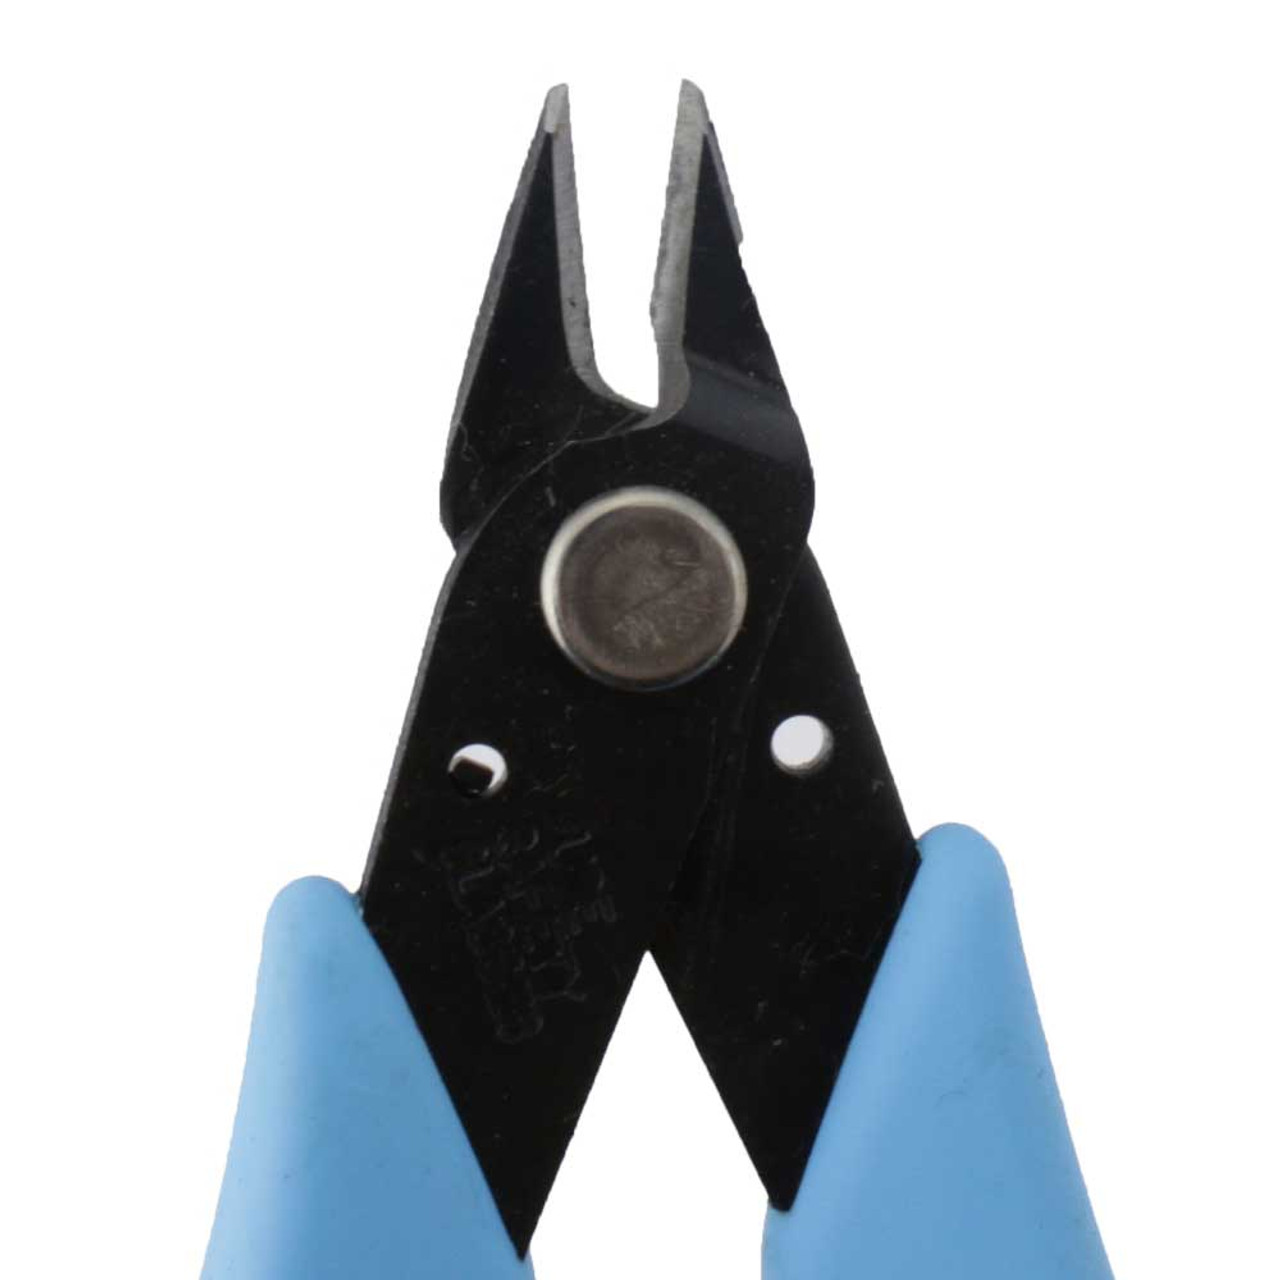 Wire Cutters, Shear Cutter, Small Side Cutting Clippers , For